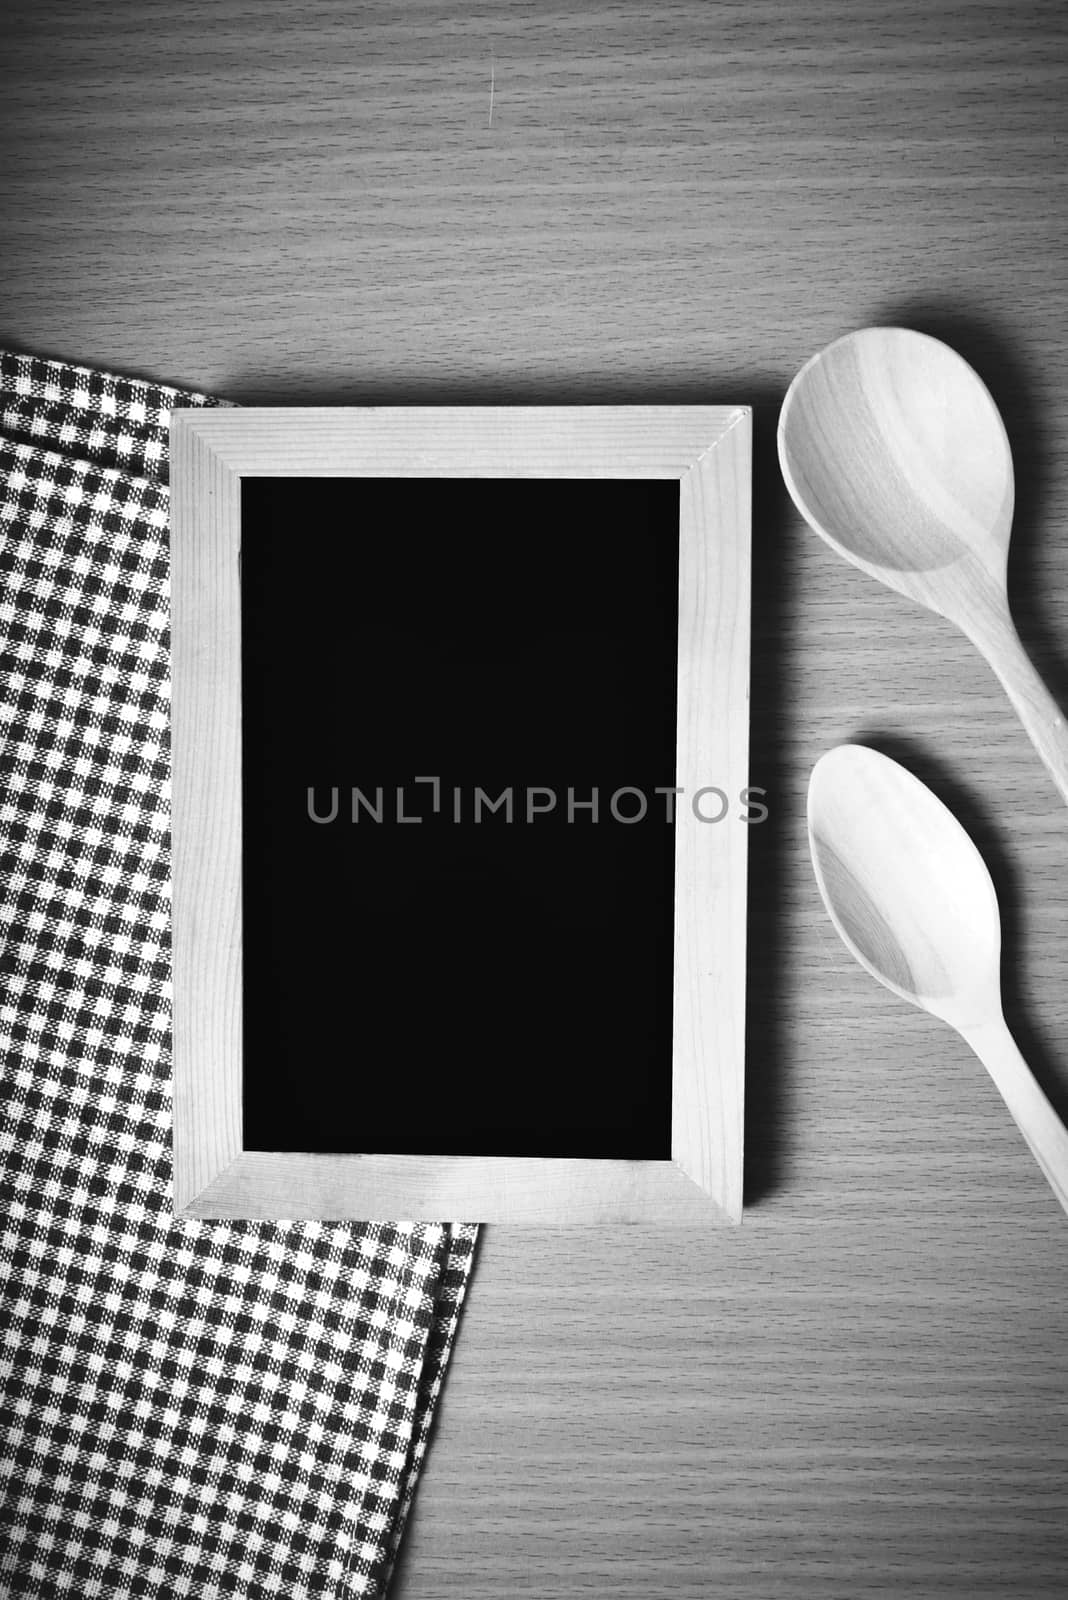 blackboard and wooden spoon on table black and white color tone style